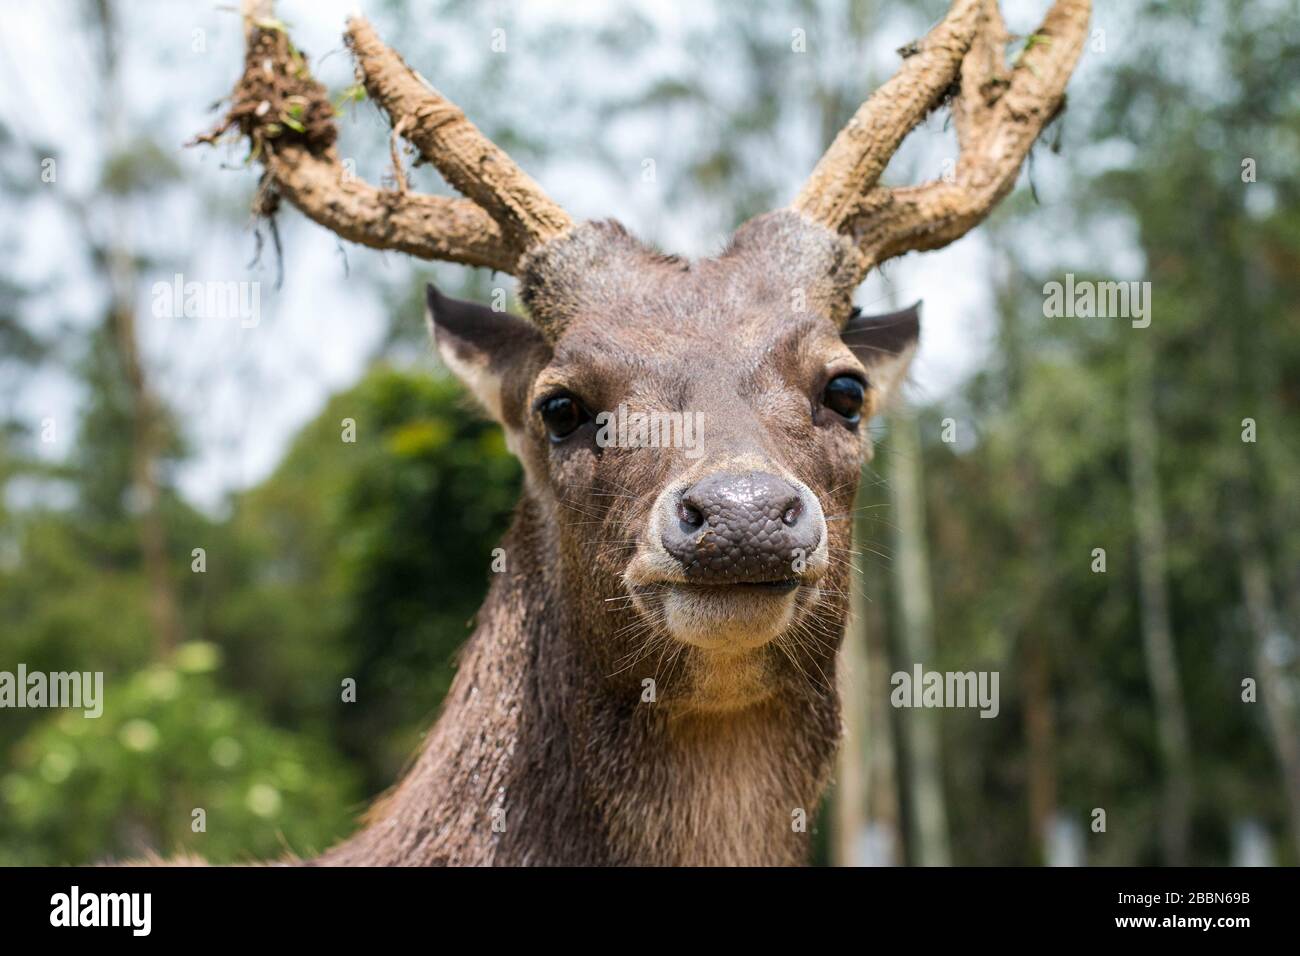 Close up image of a male deer with horns. A Stag looking at the camera. Stock Photo